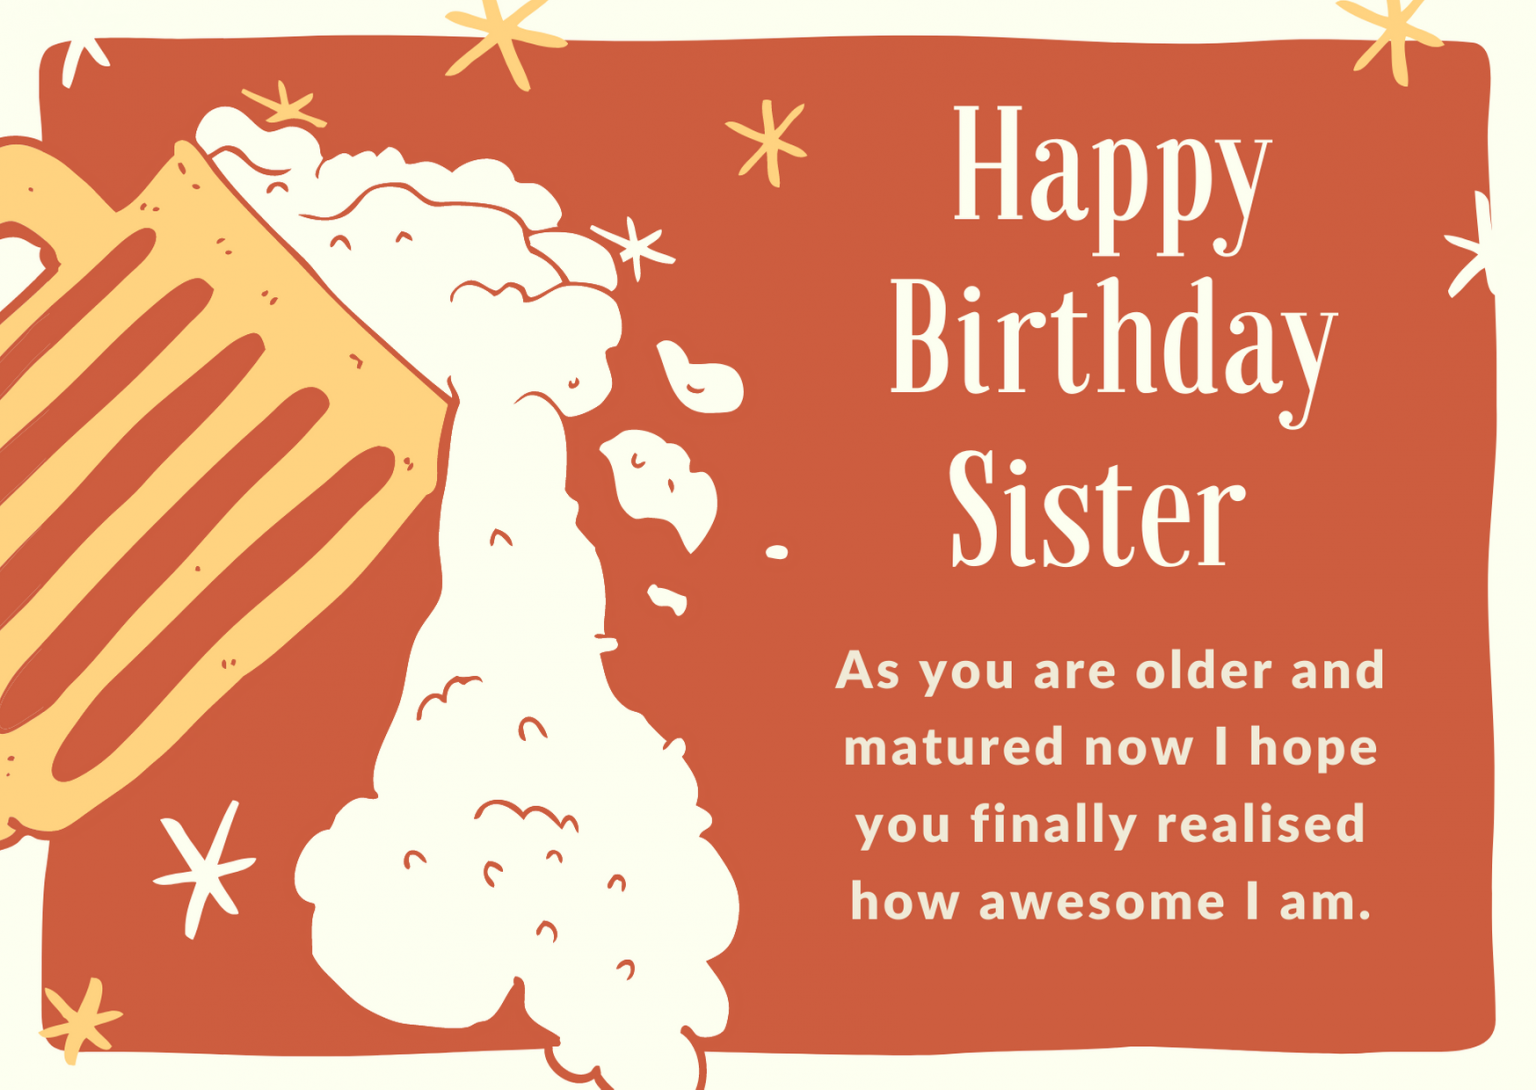 Funny birthday wishes for sister Messages, Quotes, Images, And Status